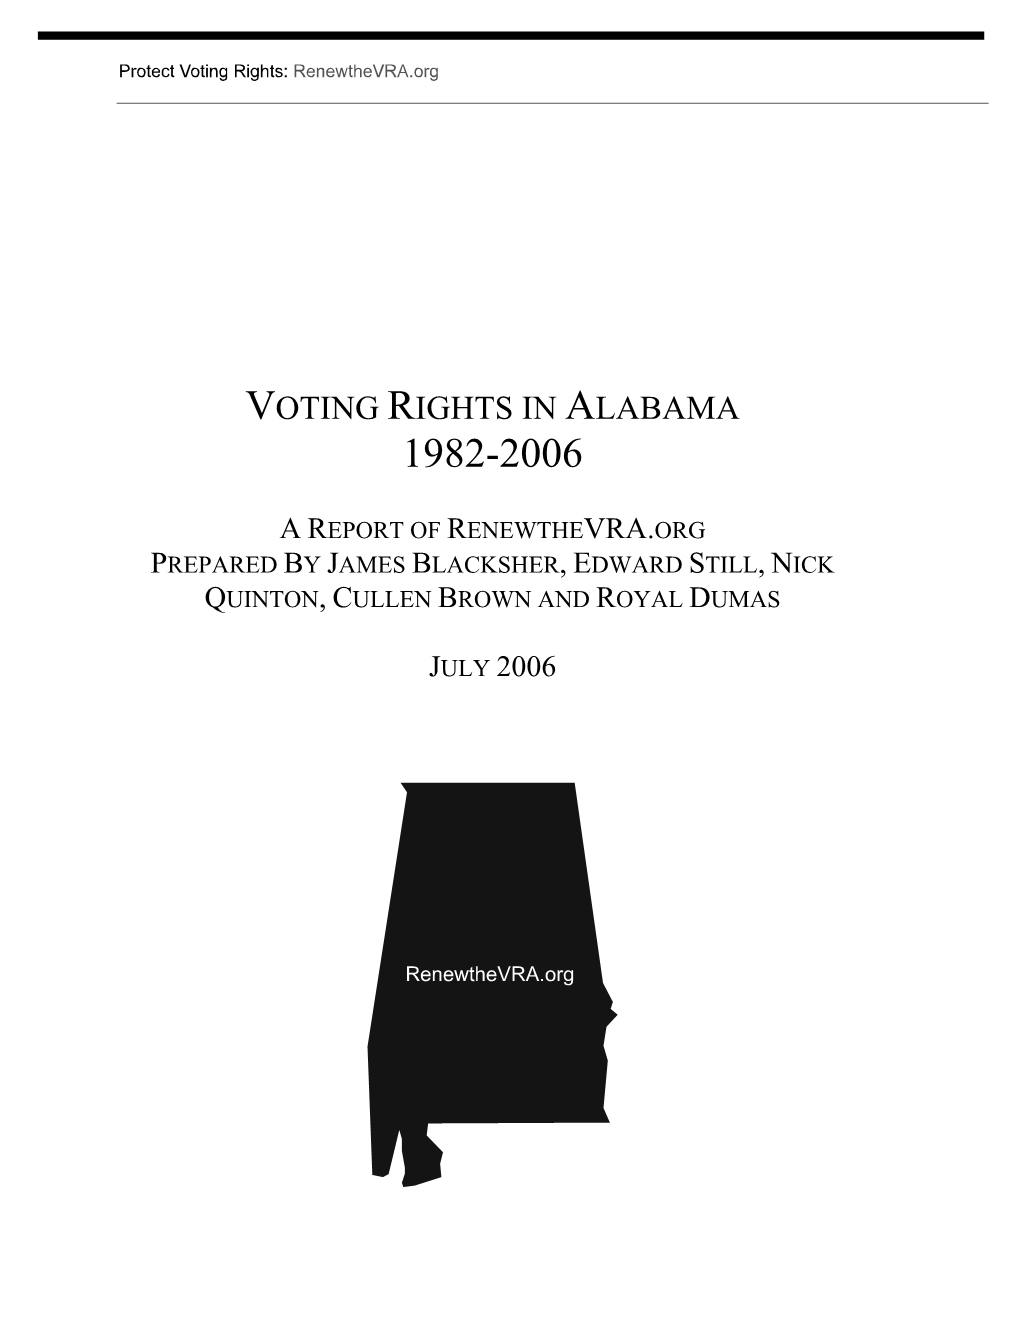 Voting Rights in Alabama 1982-2006